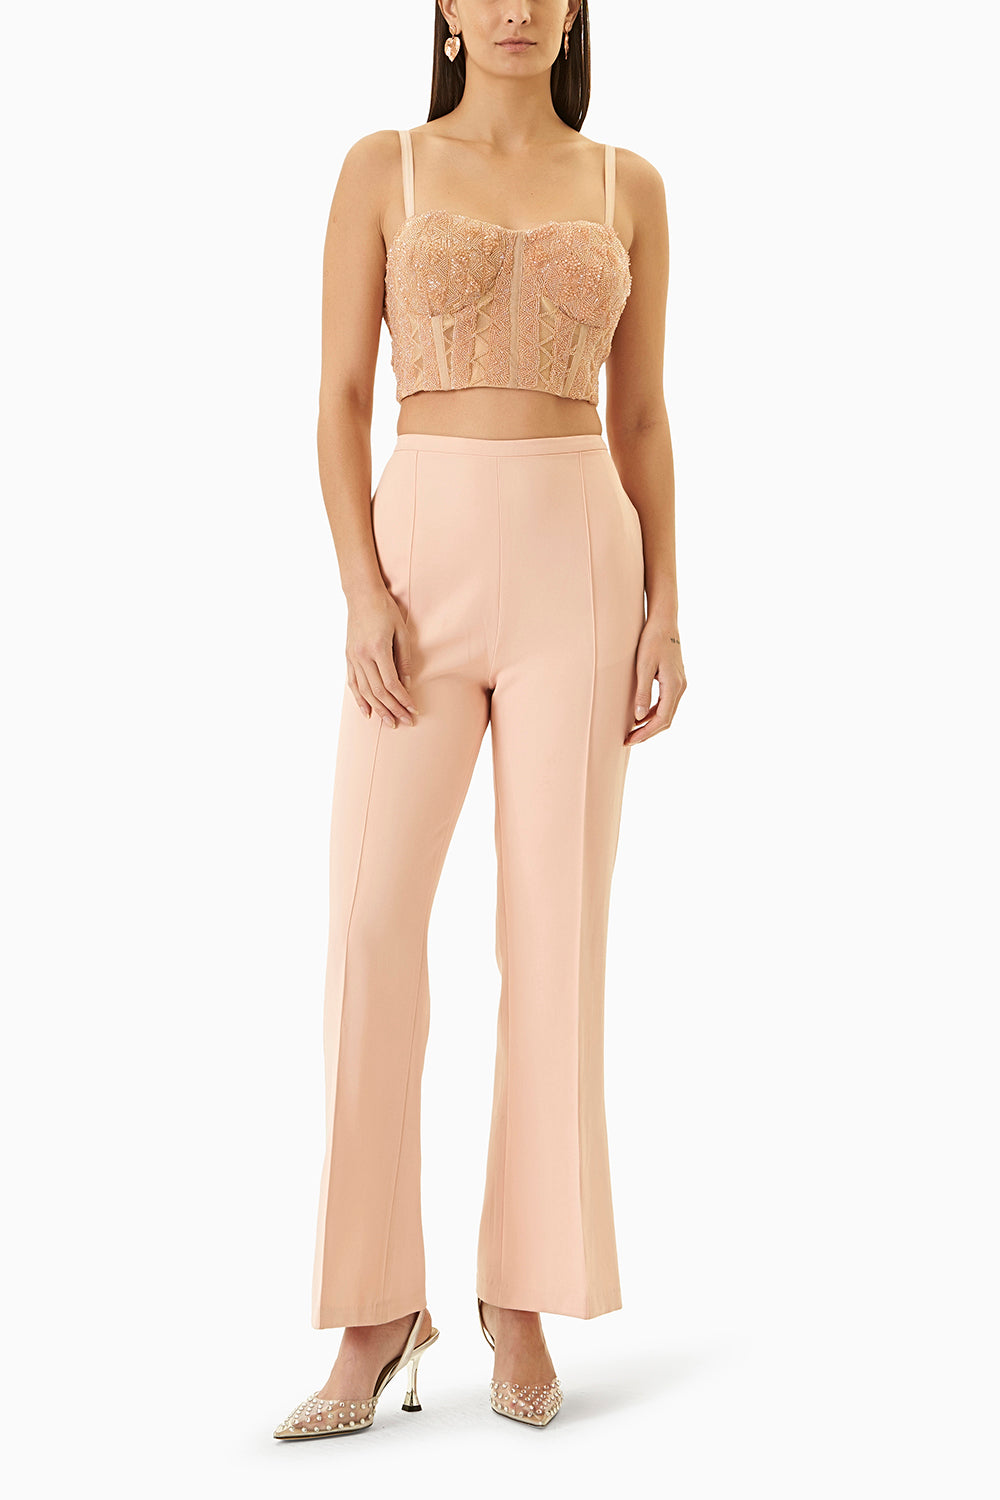 Peach Embellished Jacket With Bustier And Pants